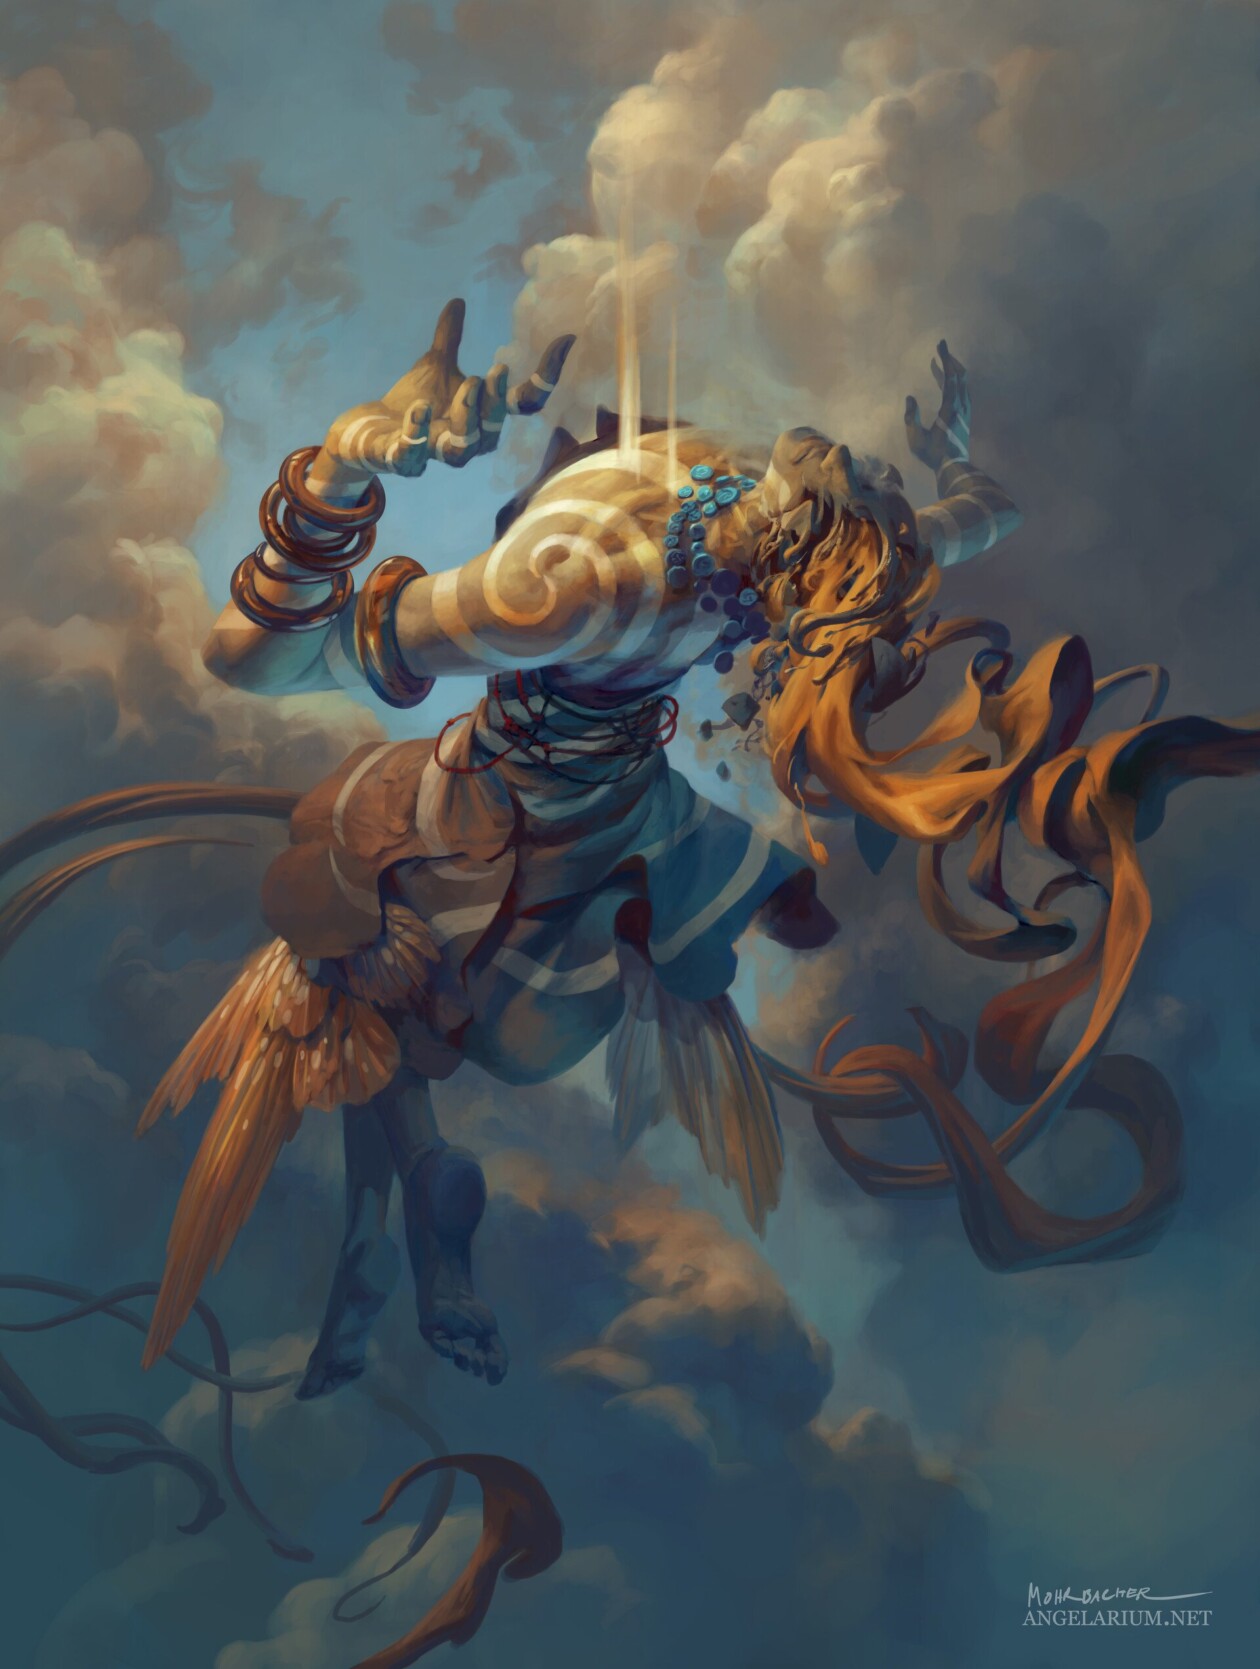 Peter Mohrbacher Blends Surrealism With Fantasy To Create Powerful Magical Beings (10)